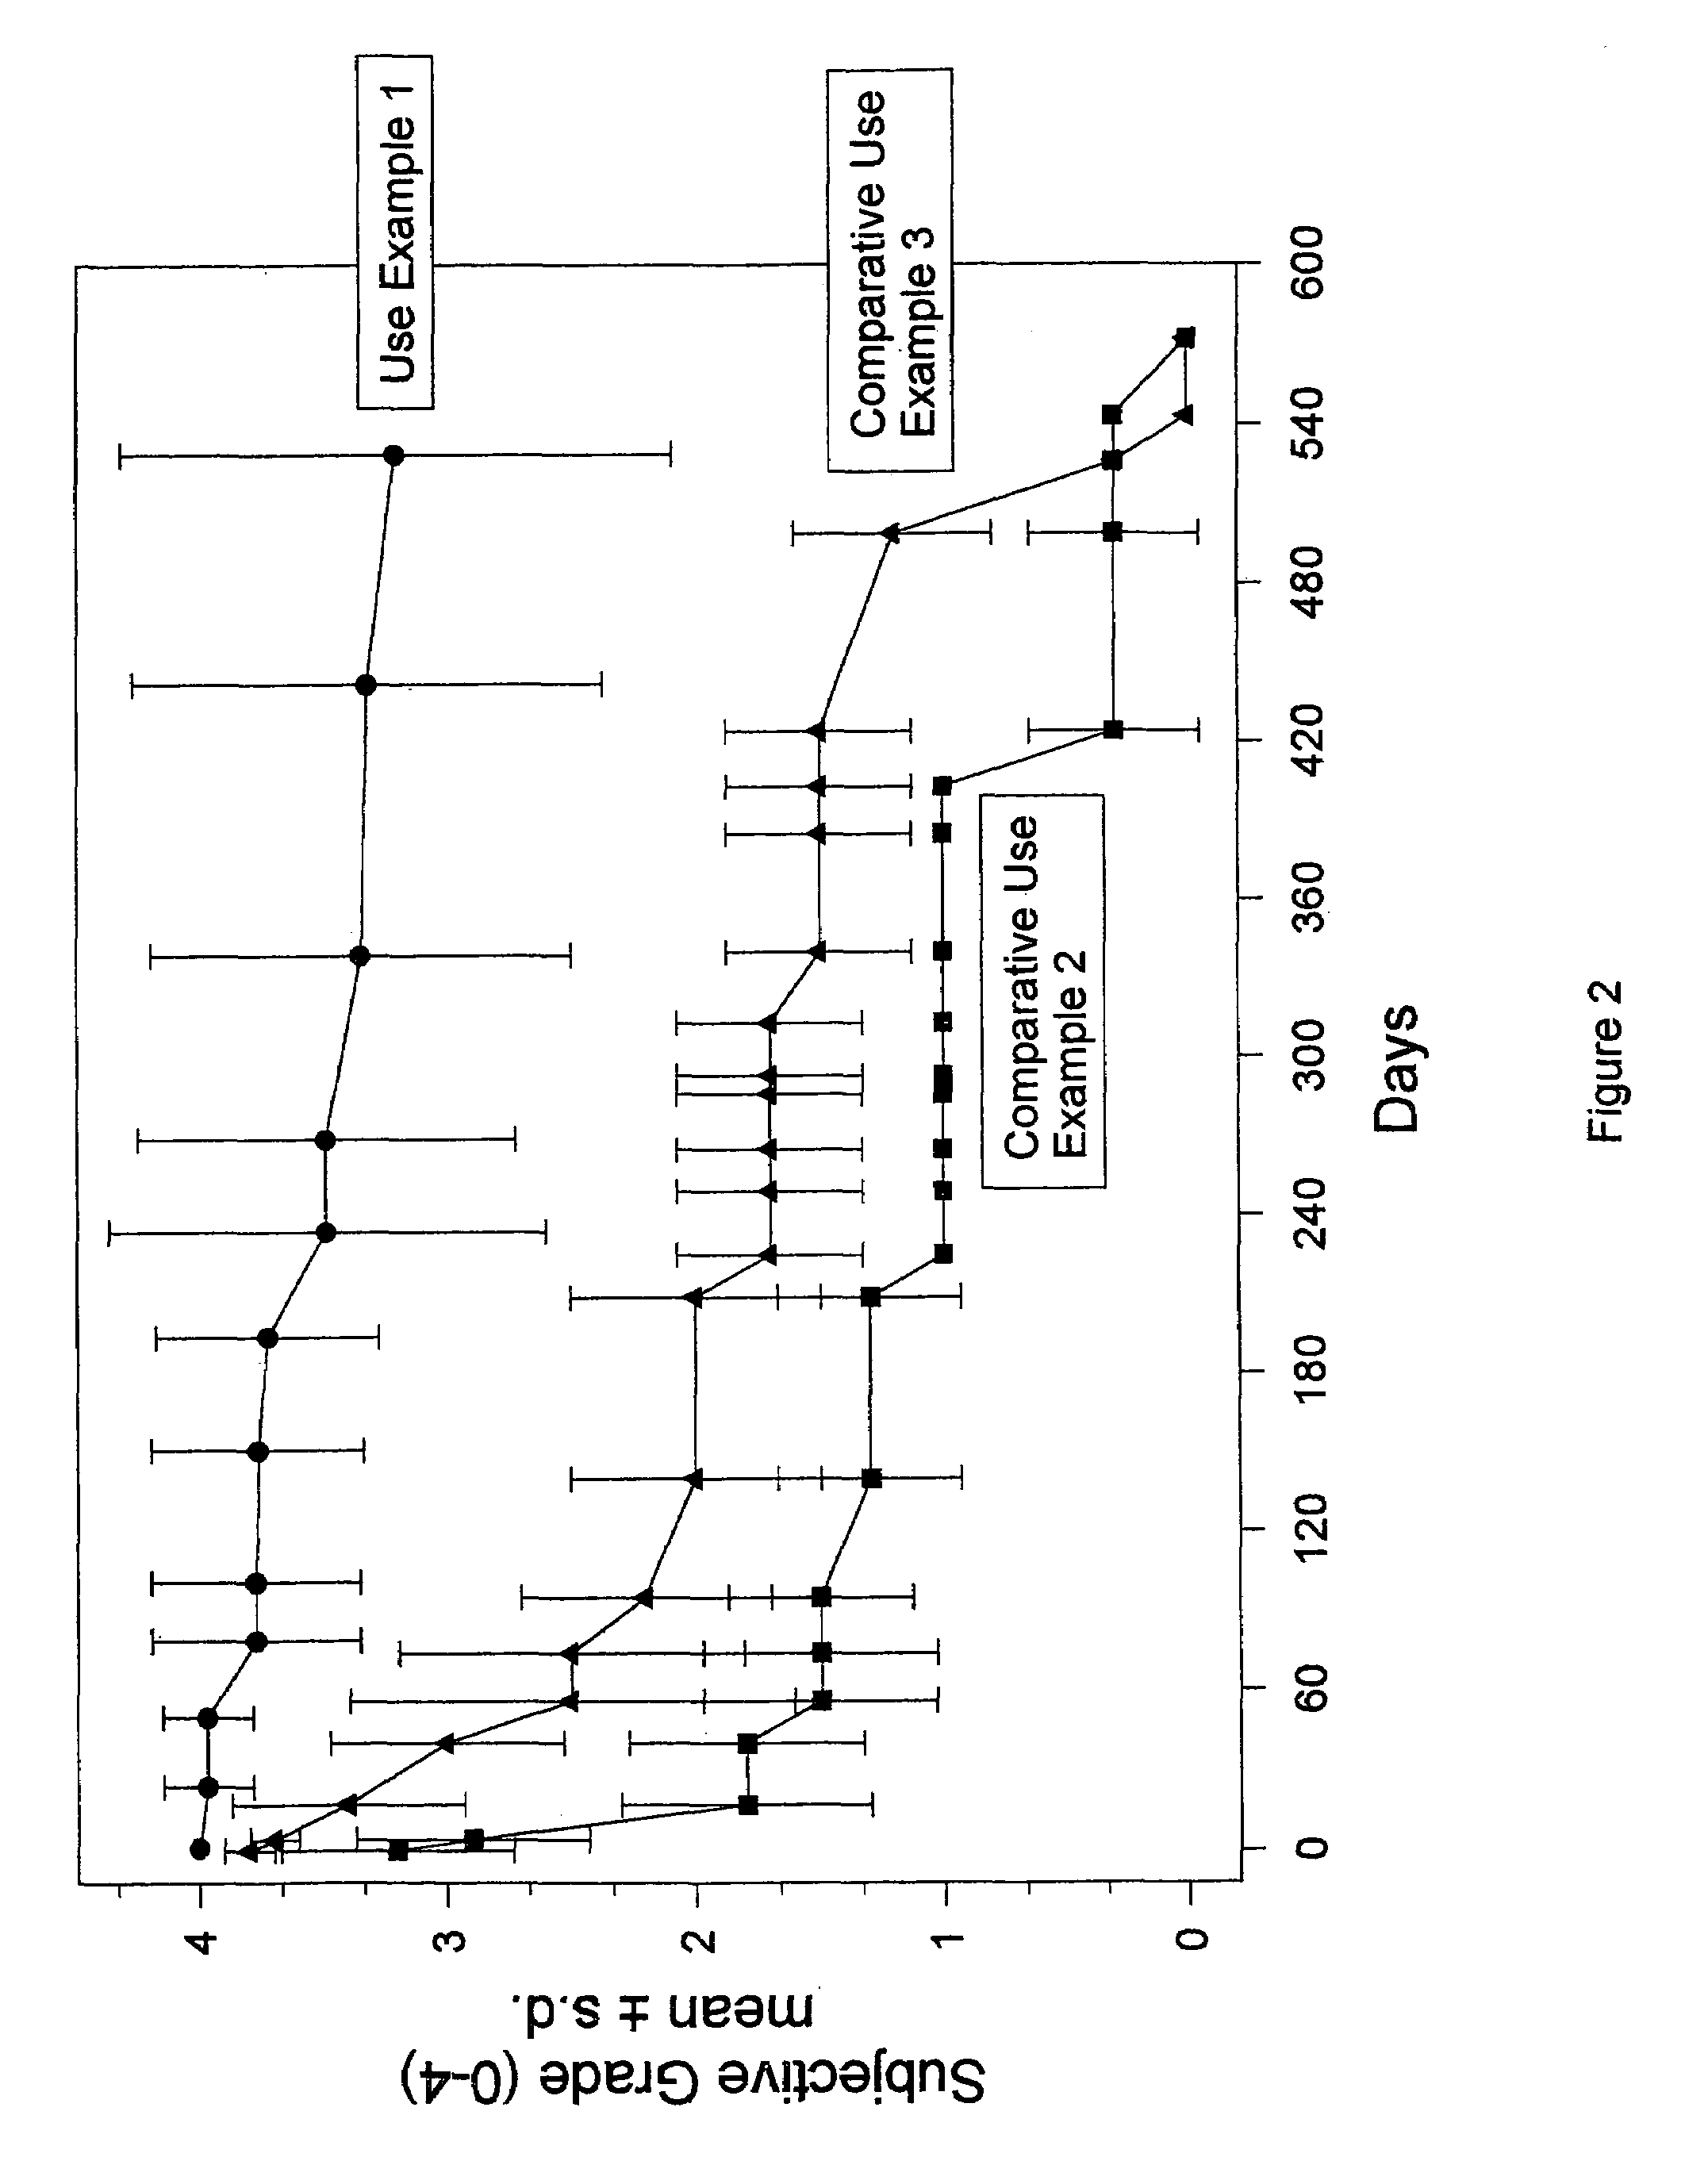 Materials for soft tissue augmentation and methods of making and using same